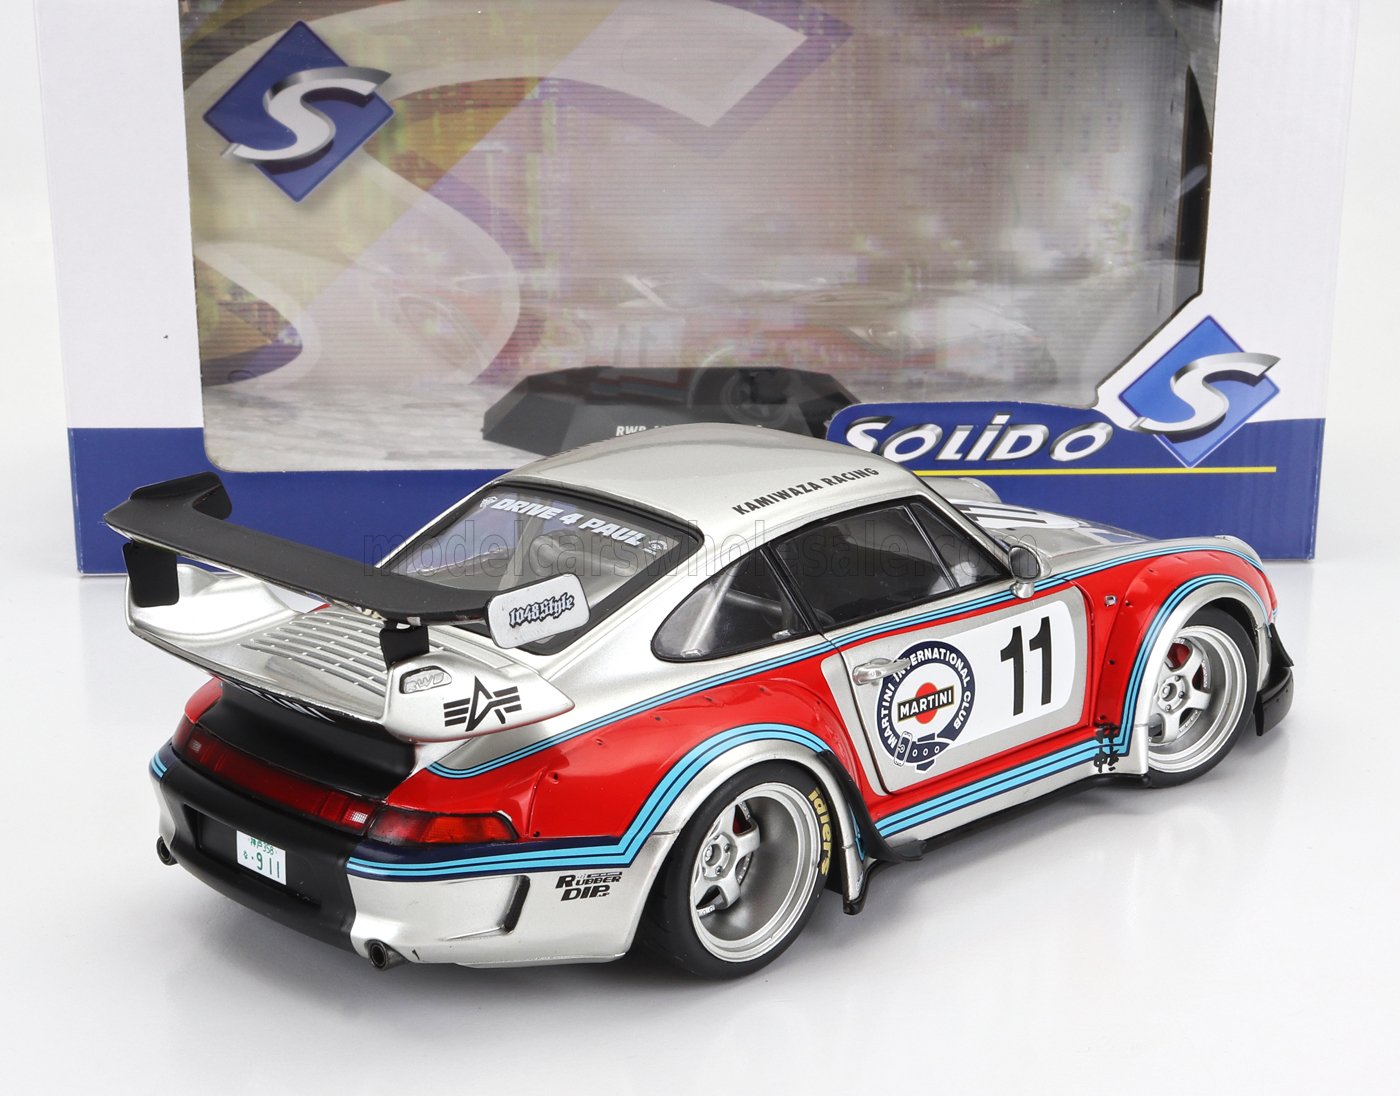 SOLIDO - 1/18 - PORSCHE - 911 993 RWB BODYKIT N 11 MARTINI RACING LIVERY COUPE 2020 - SILVER RED BLUE